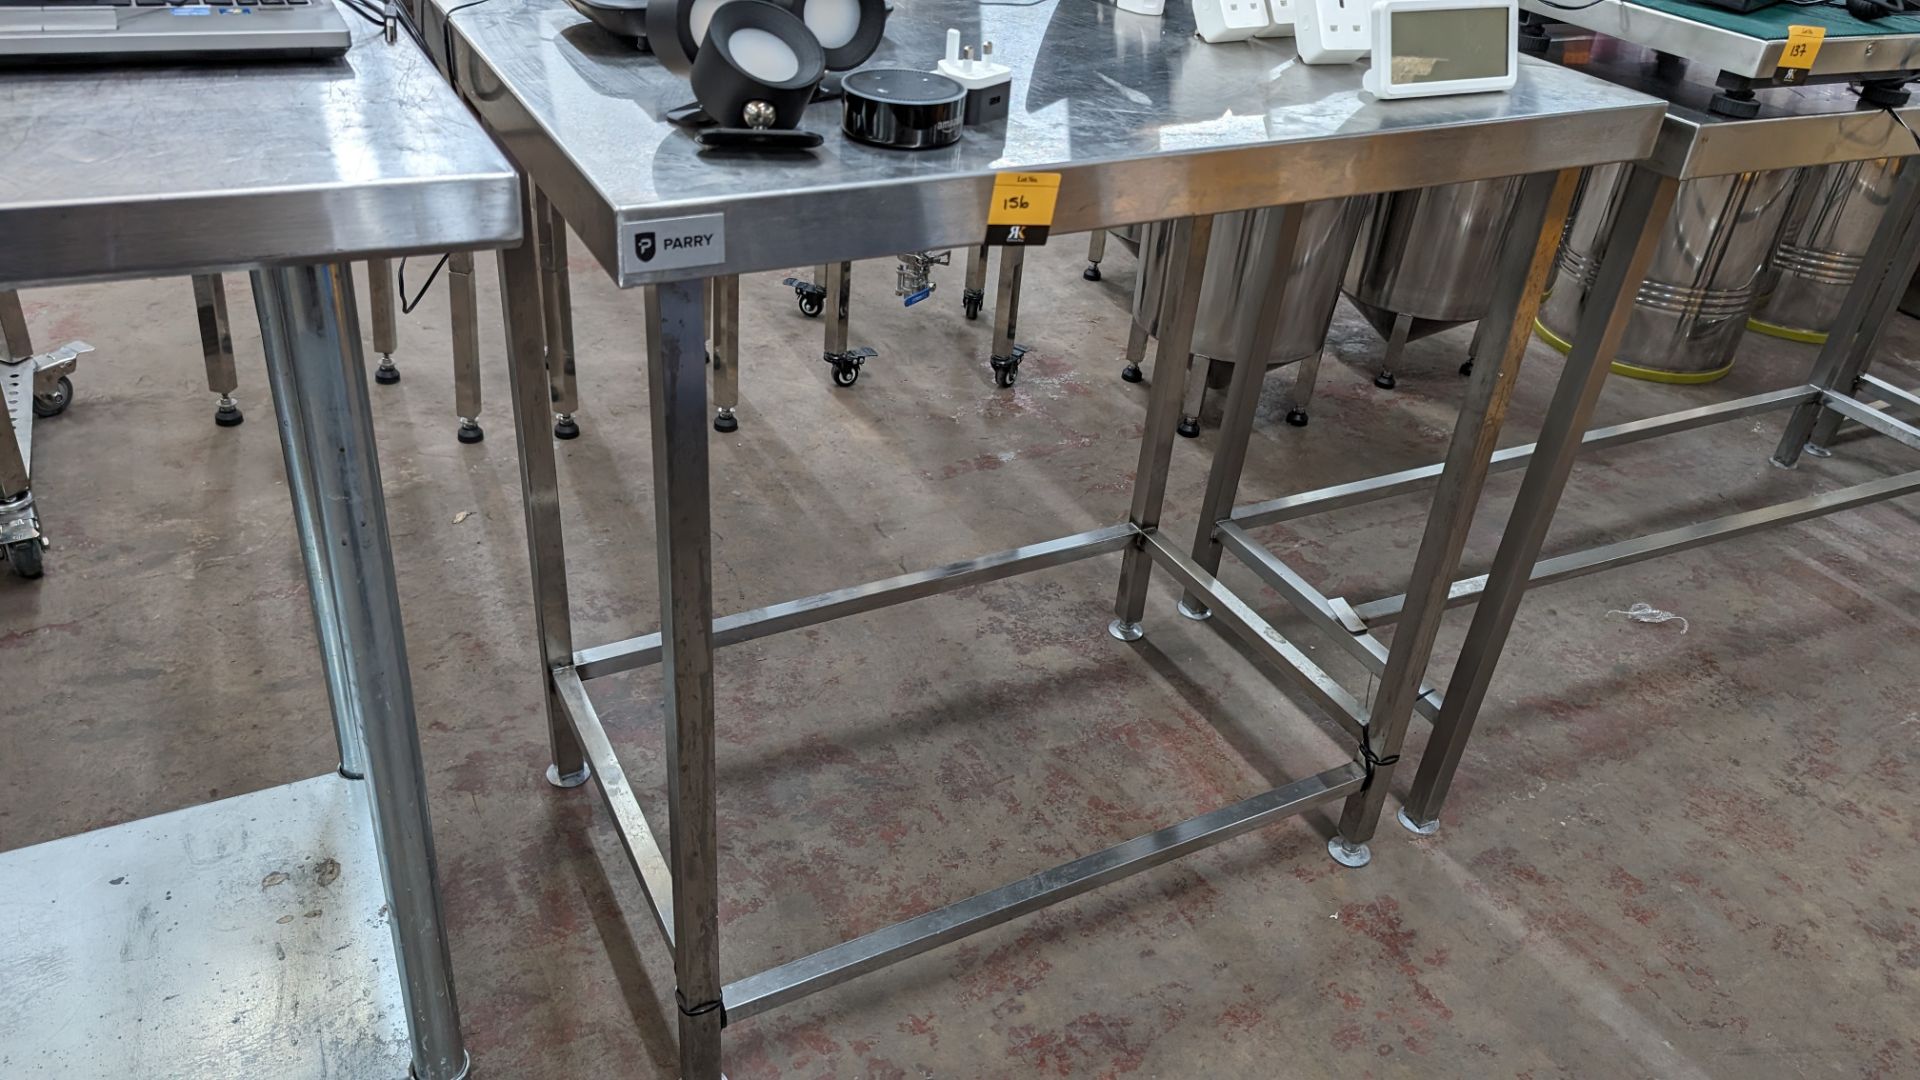 Stainless steel table with upstand at rear, max dimensions: 920mm x 600mm x 900mm - Image 3 of 3